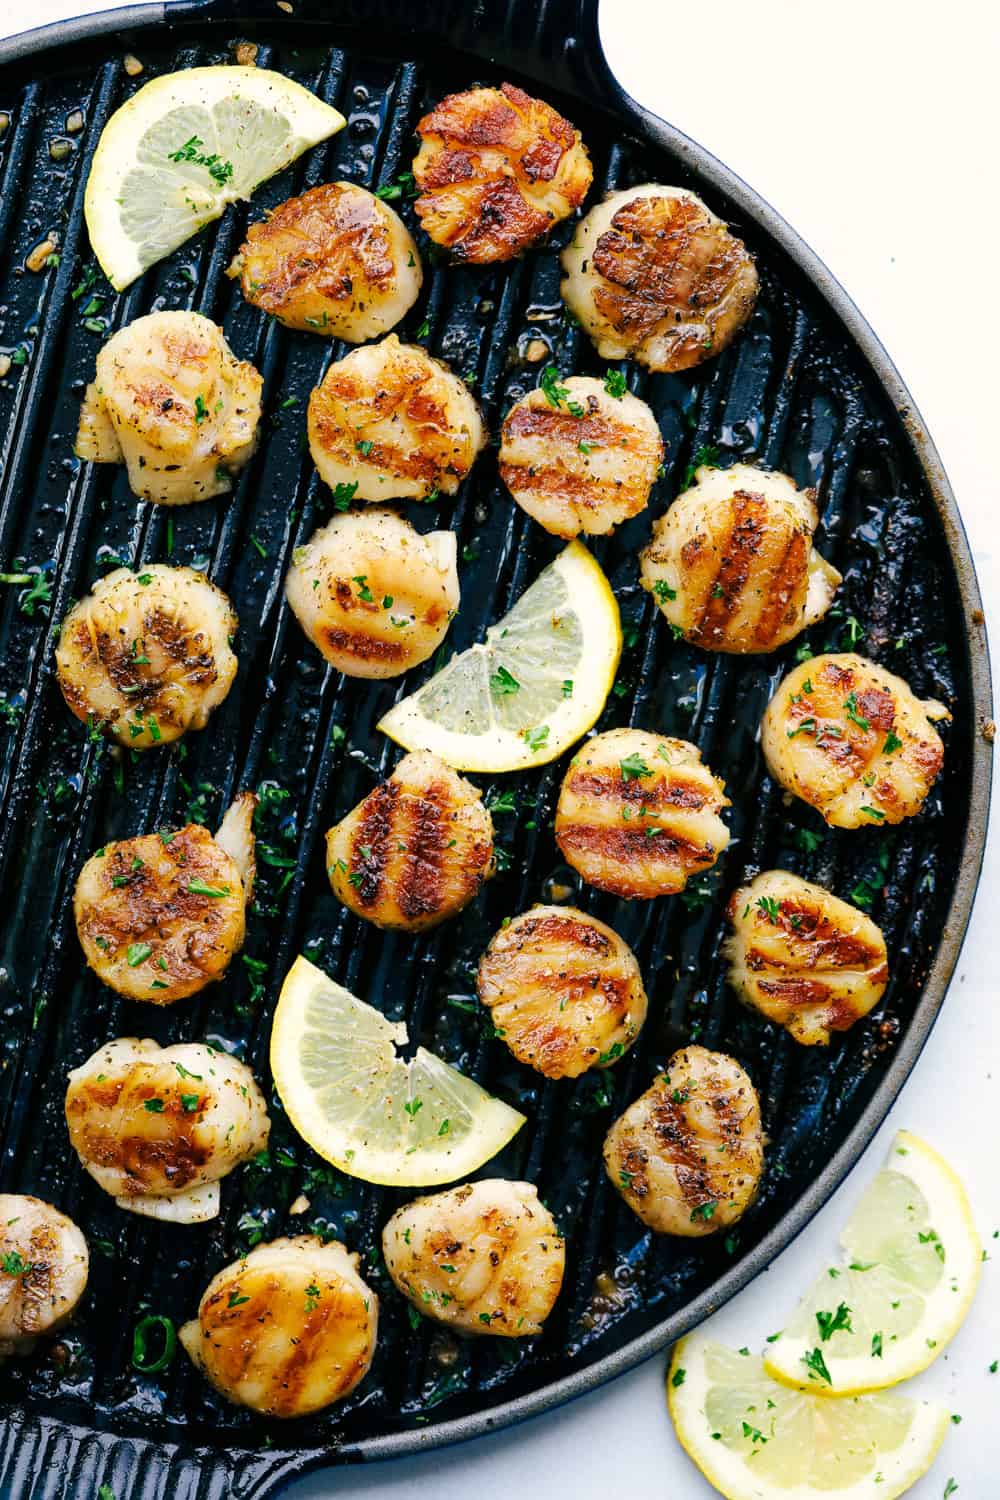 Grilled Lemon Garlic scallops on the grill